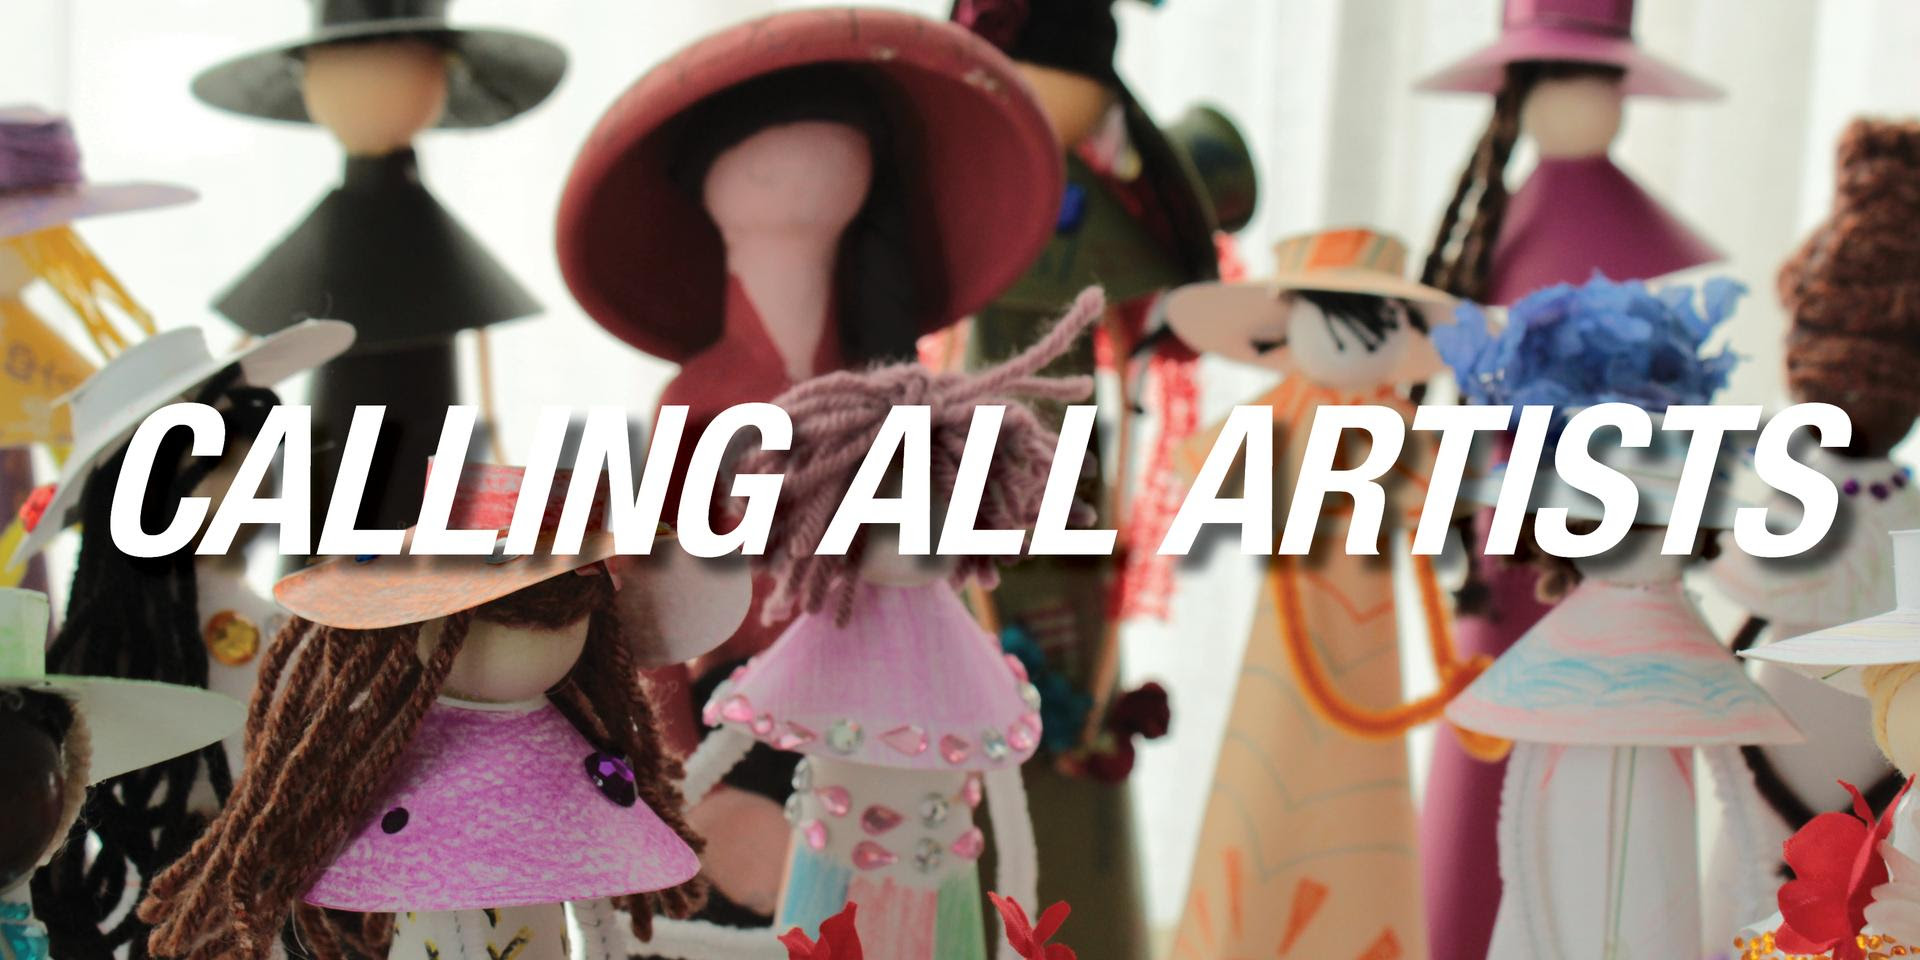 Boost your artistic instincts with our vibrant, handmade doll figures adorned with a range of unique hats. The bold white 'calling all artists' message is overlaying and inviting creativity.